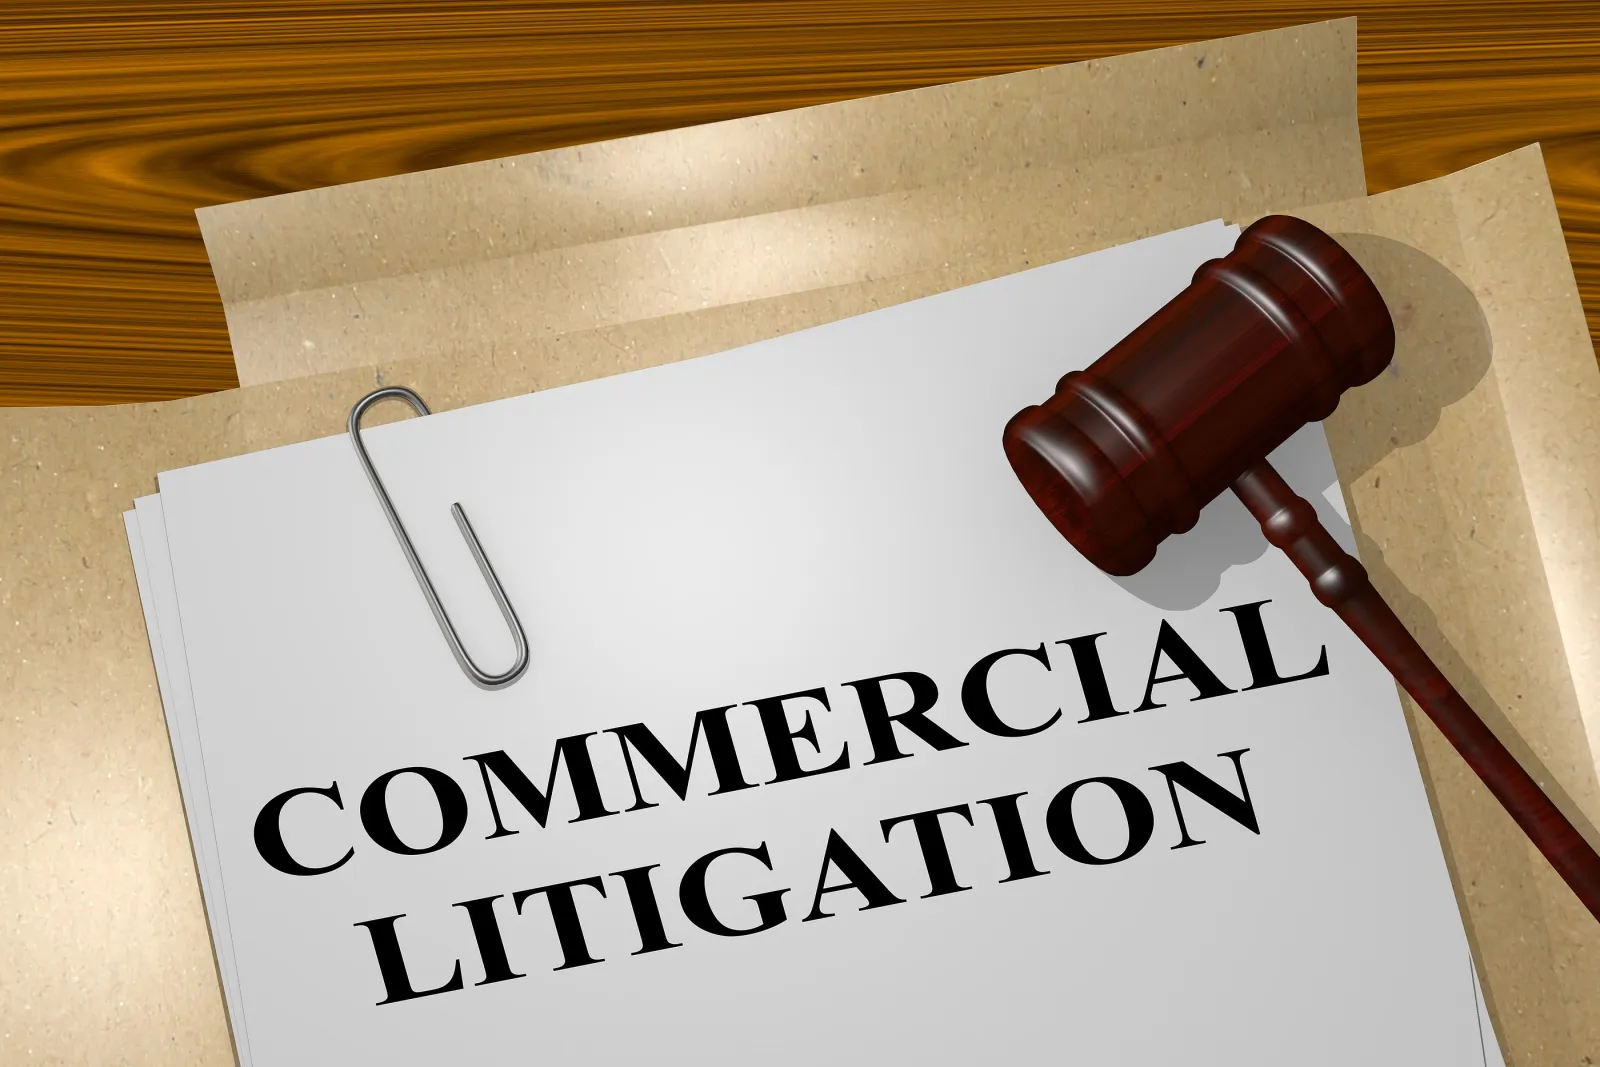 Folder with commercial litigation with gravel